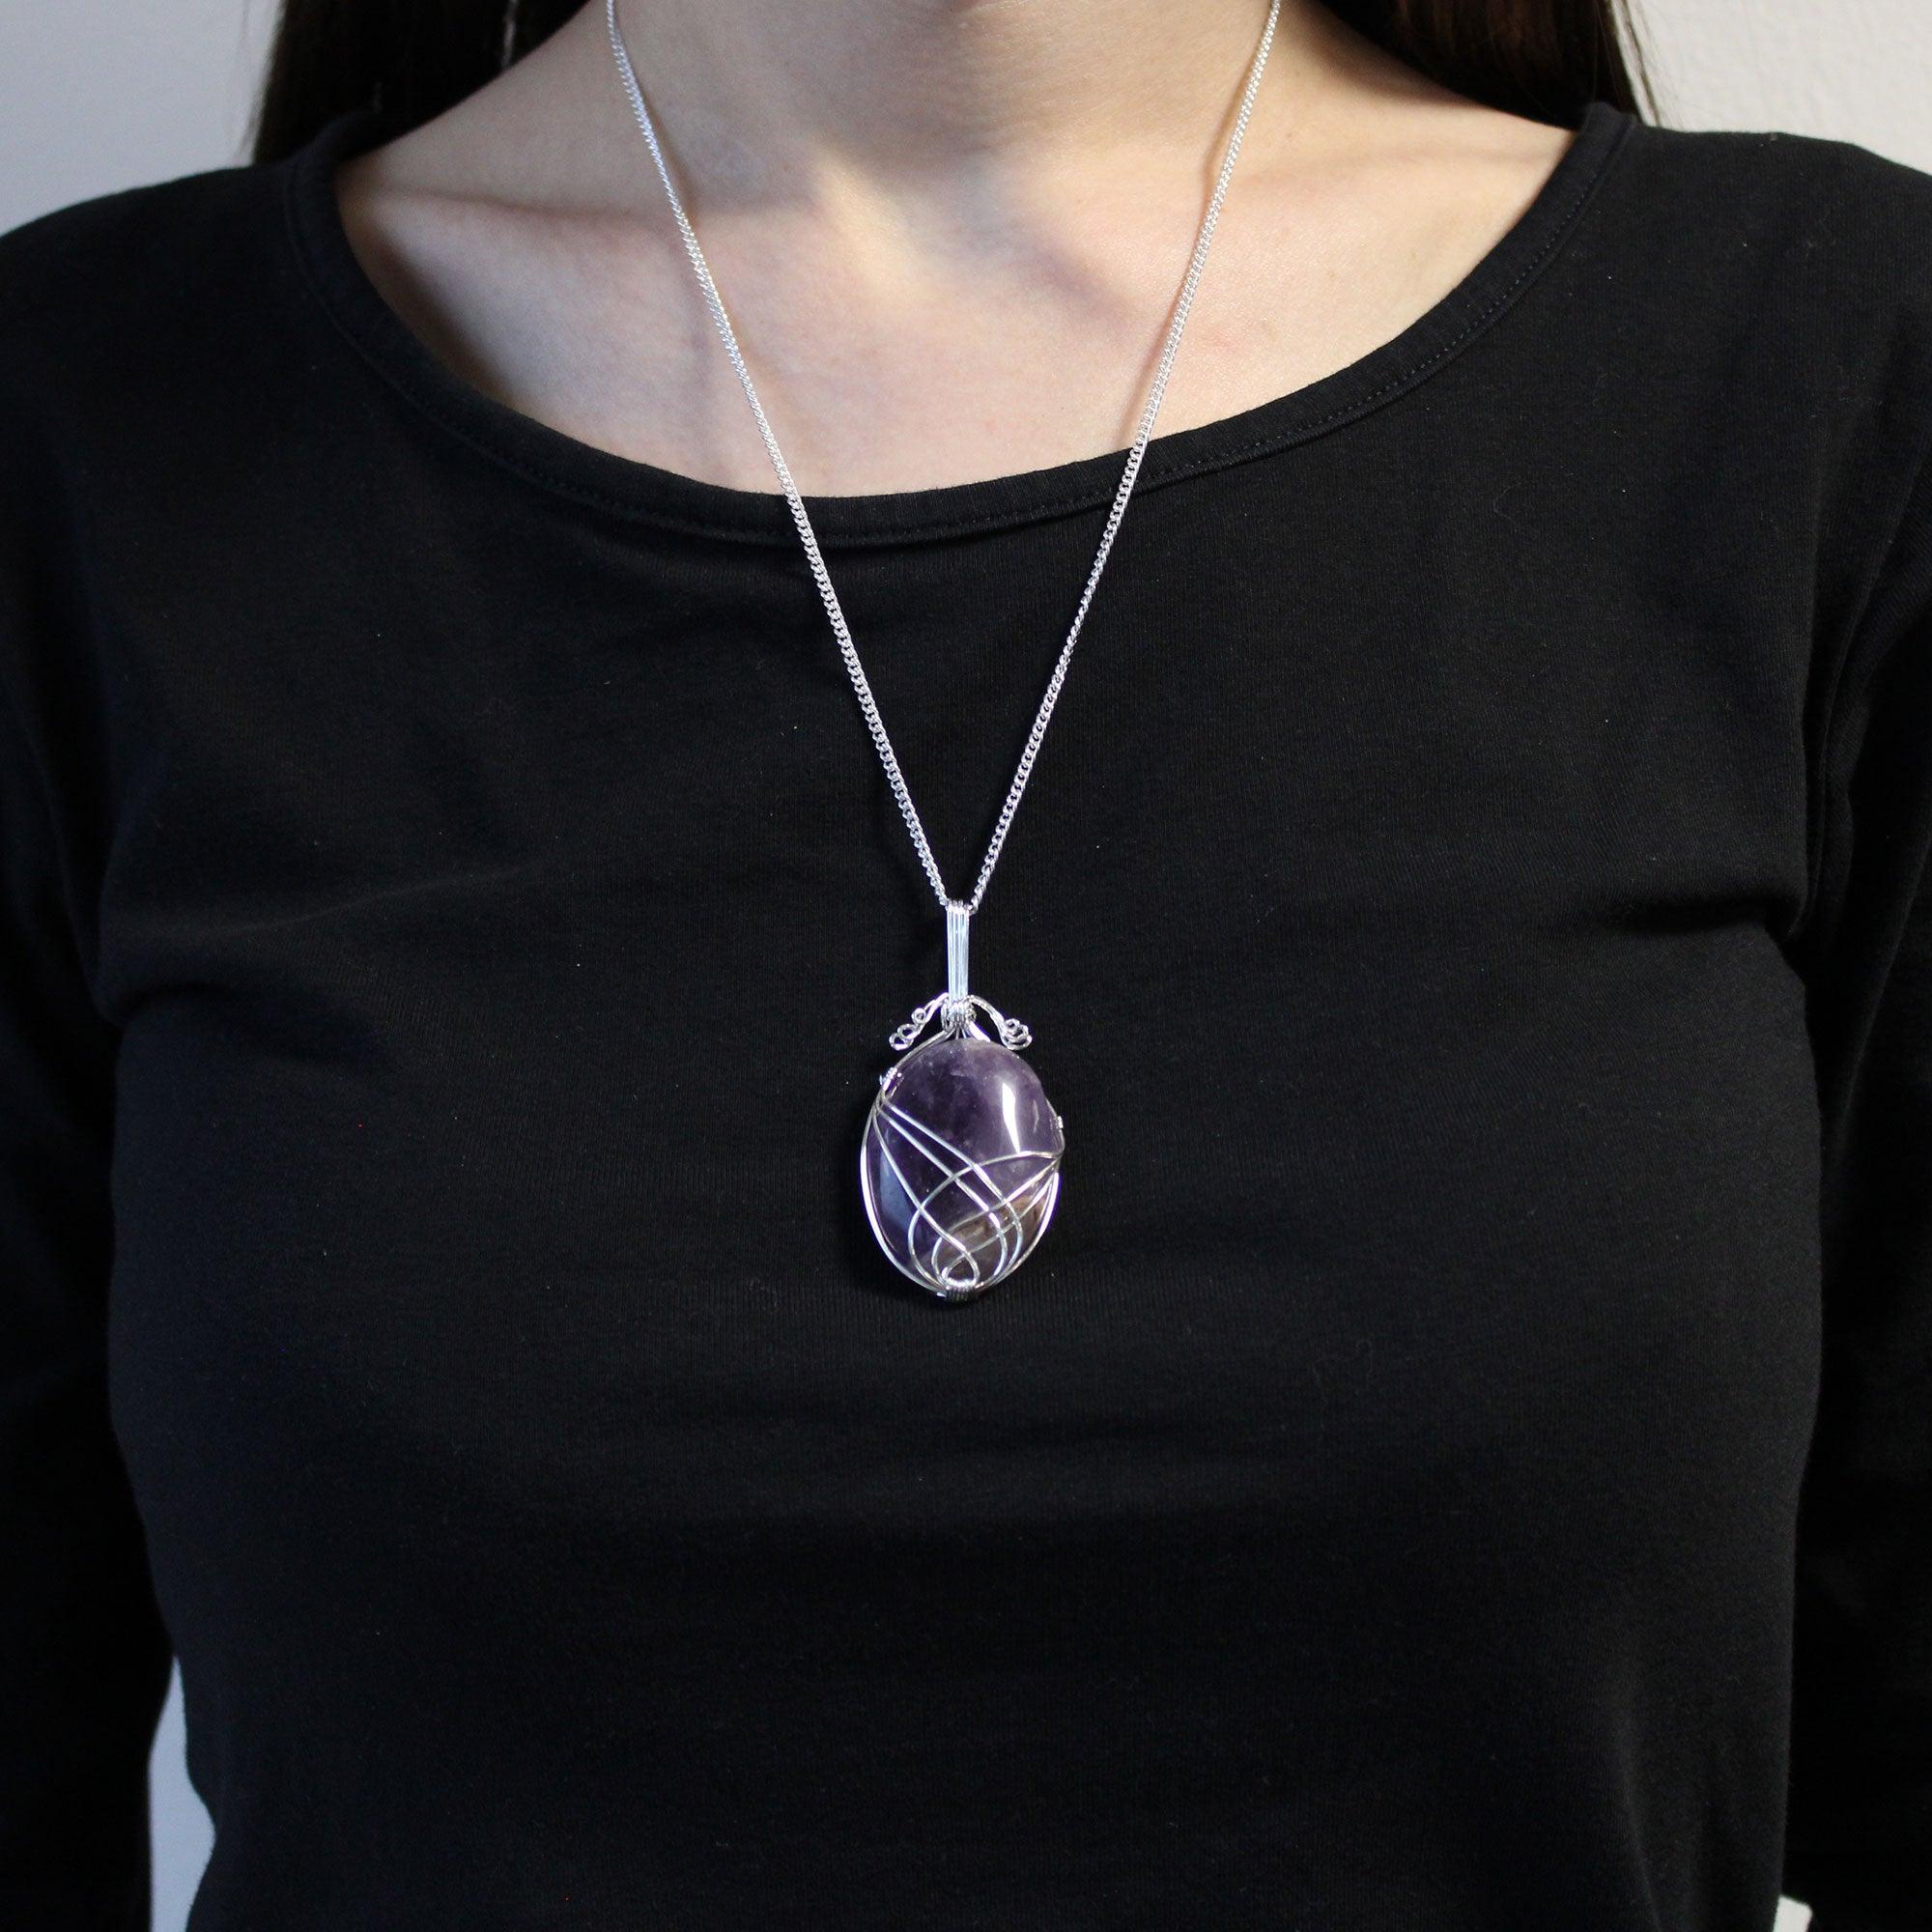 Swirl Wrapped Gemstone Necklace - Amethyst - Charming Spaces